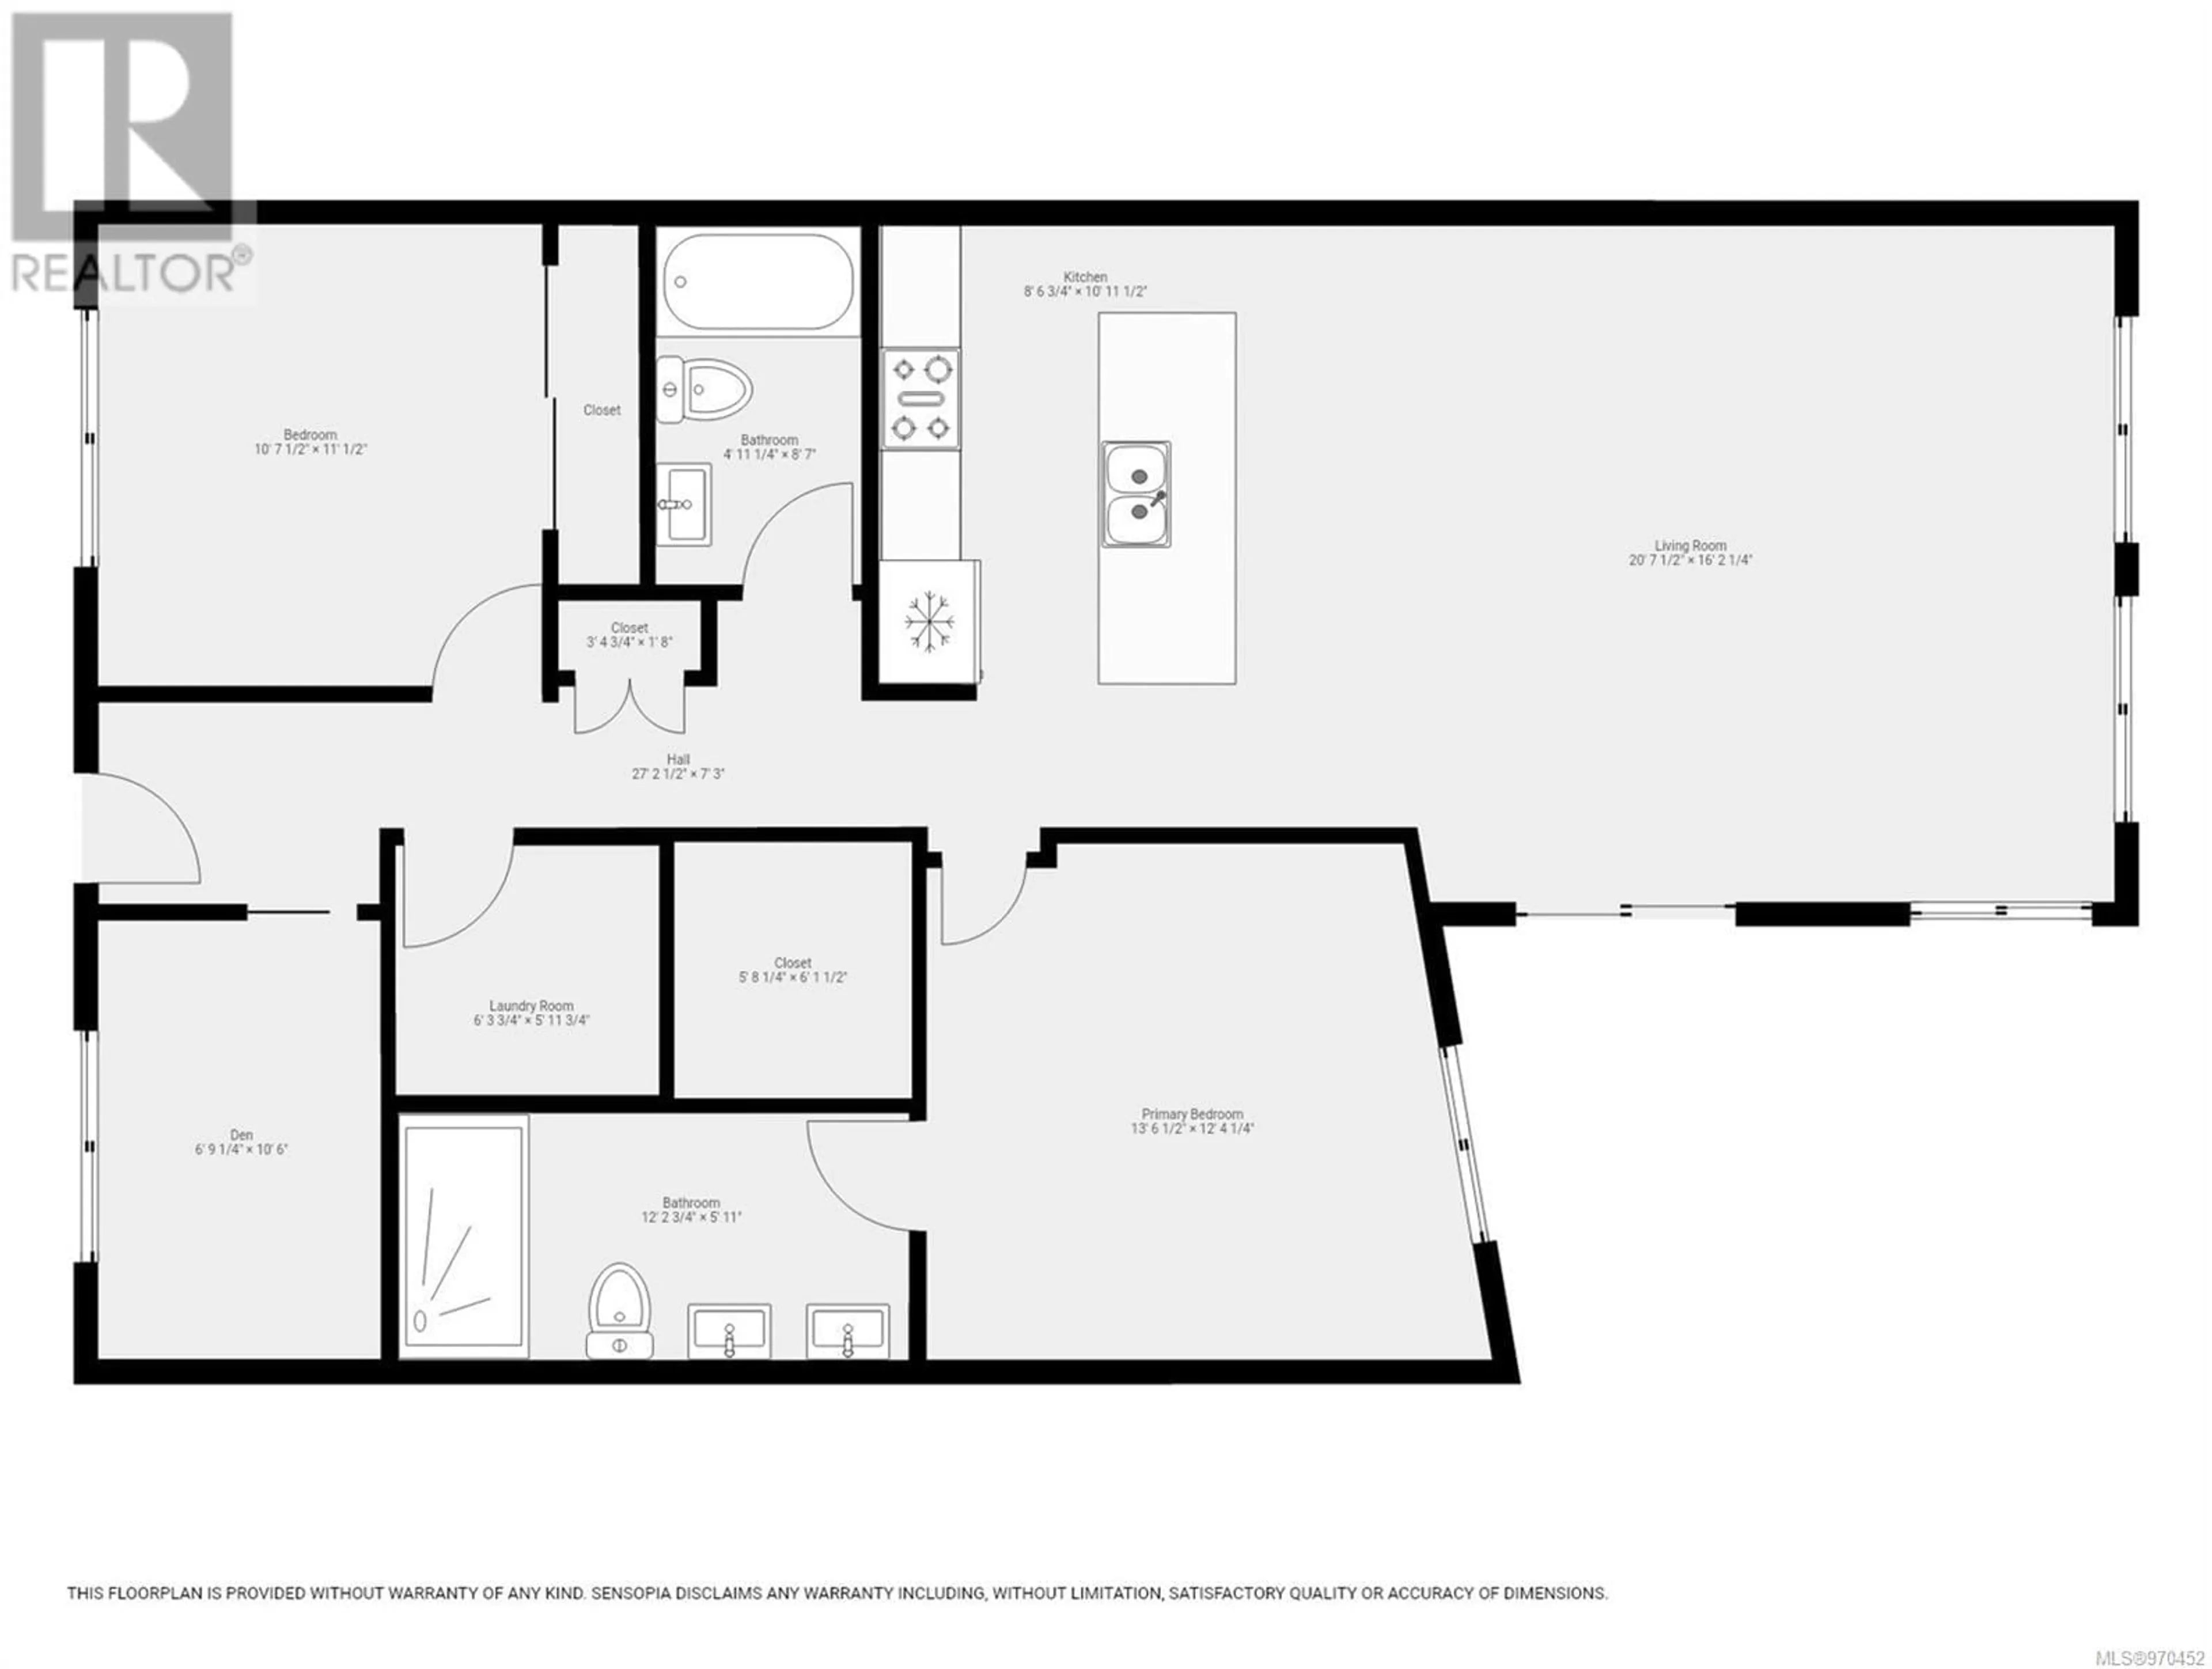 Floor plan for 204 536 Island Hwy S, Campbell River British Columbia V9W1A5